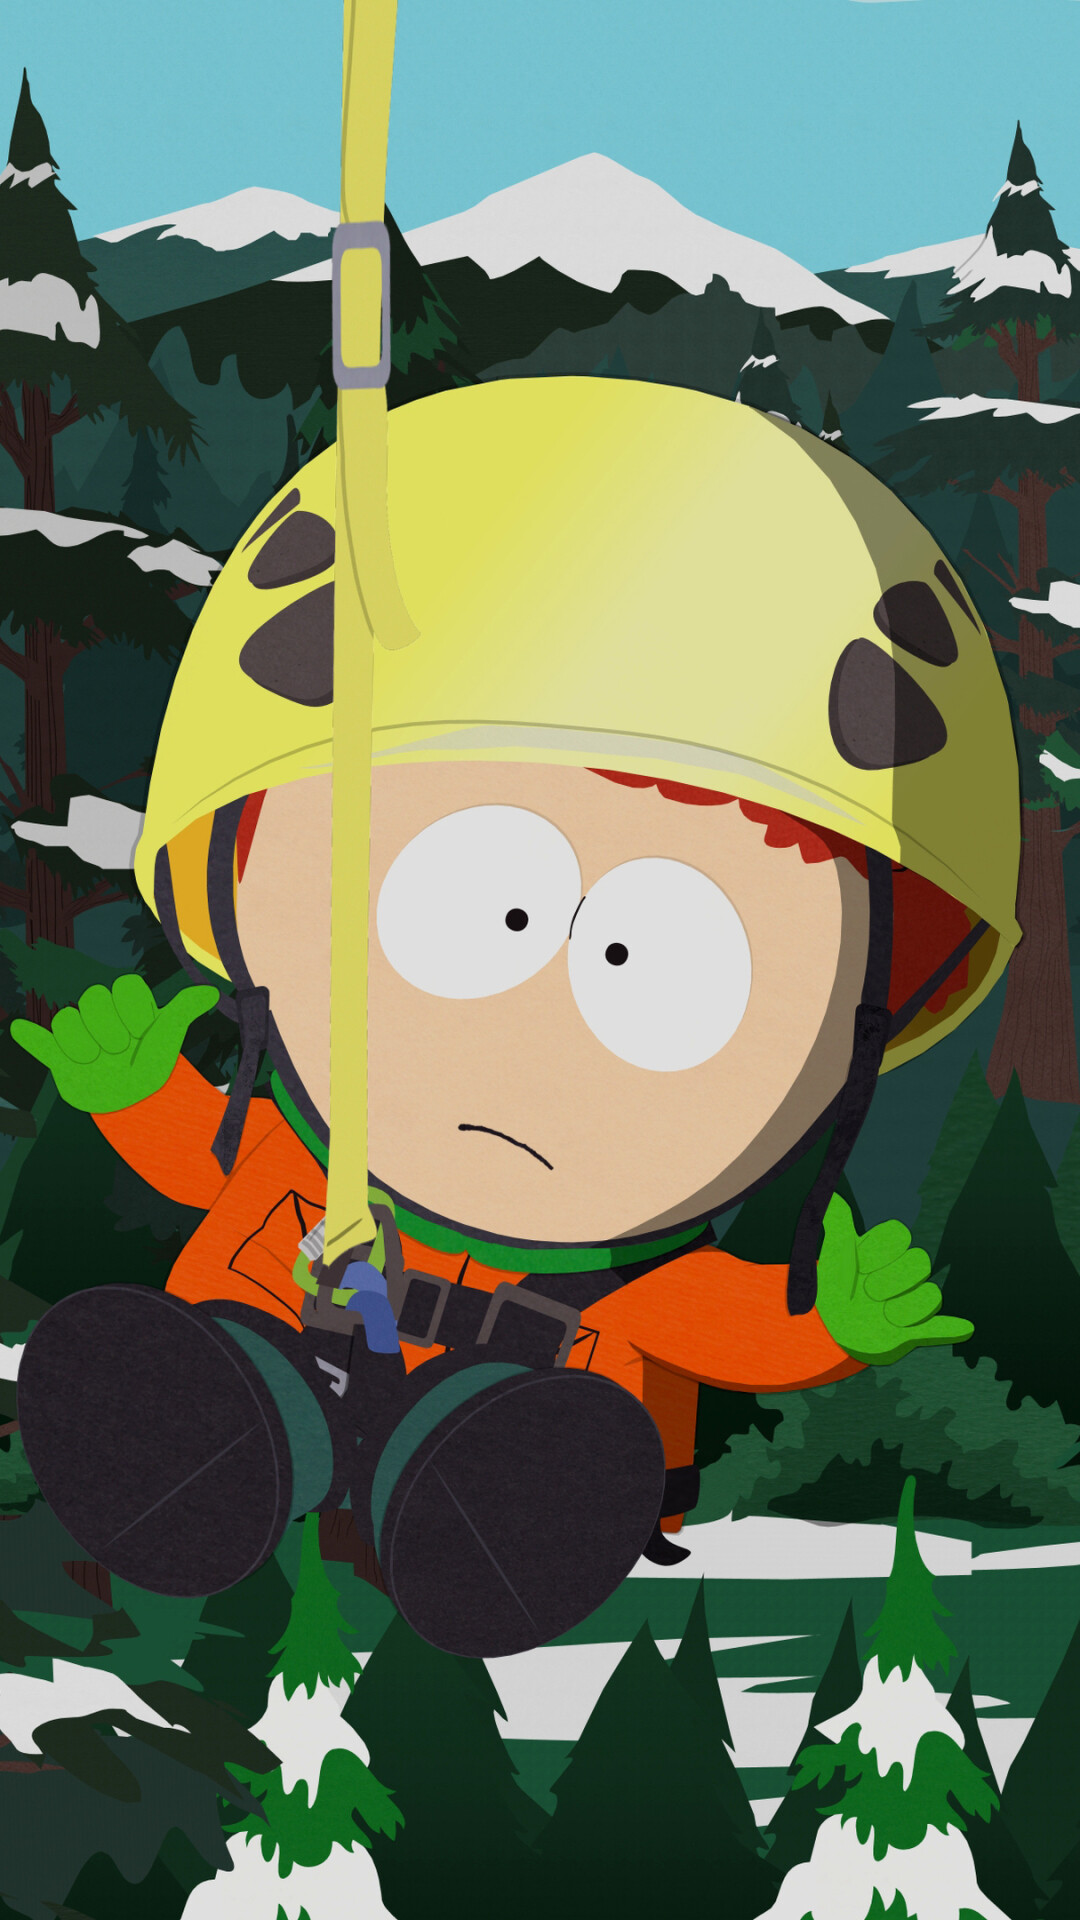 South Park: Kyle Broflovski is voiced by and loosely based on series co-creator Matt Stone. 1080x1920 Full HD Wallpaper.